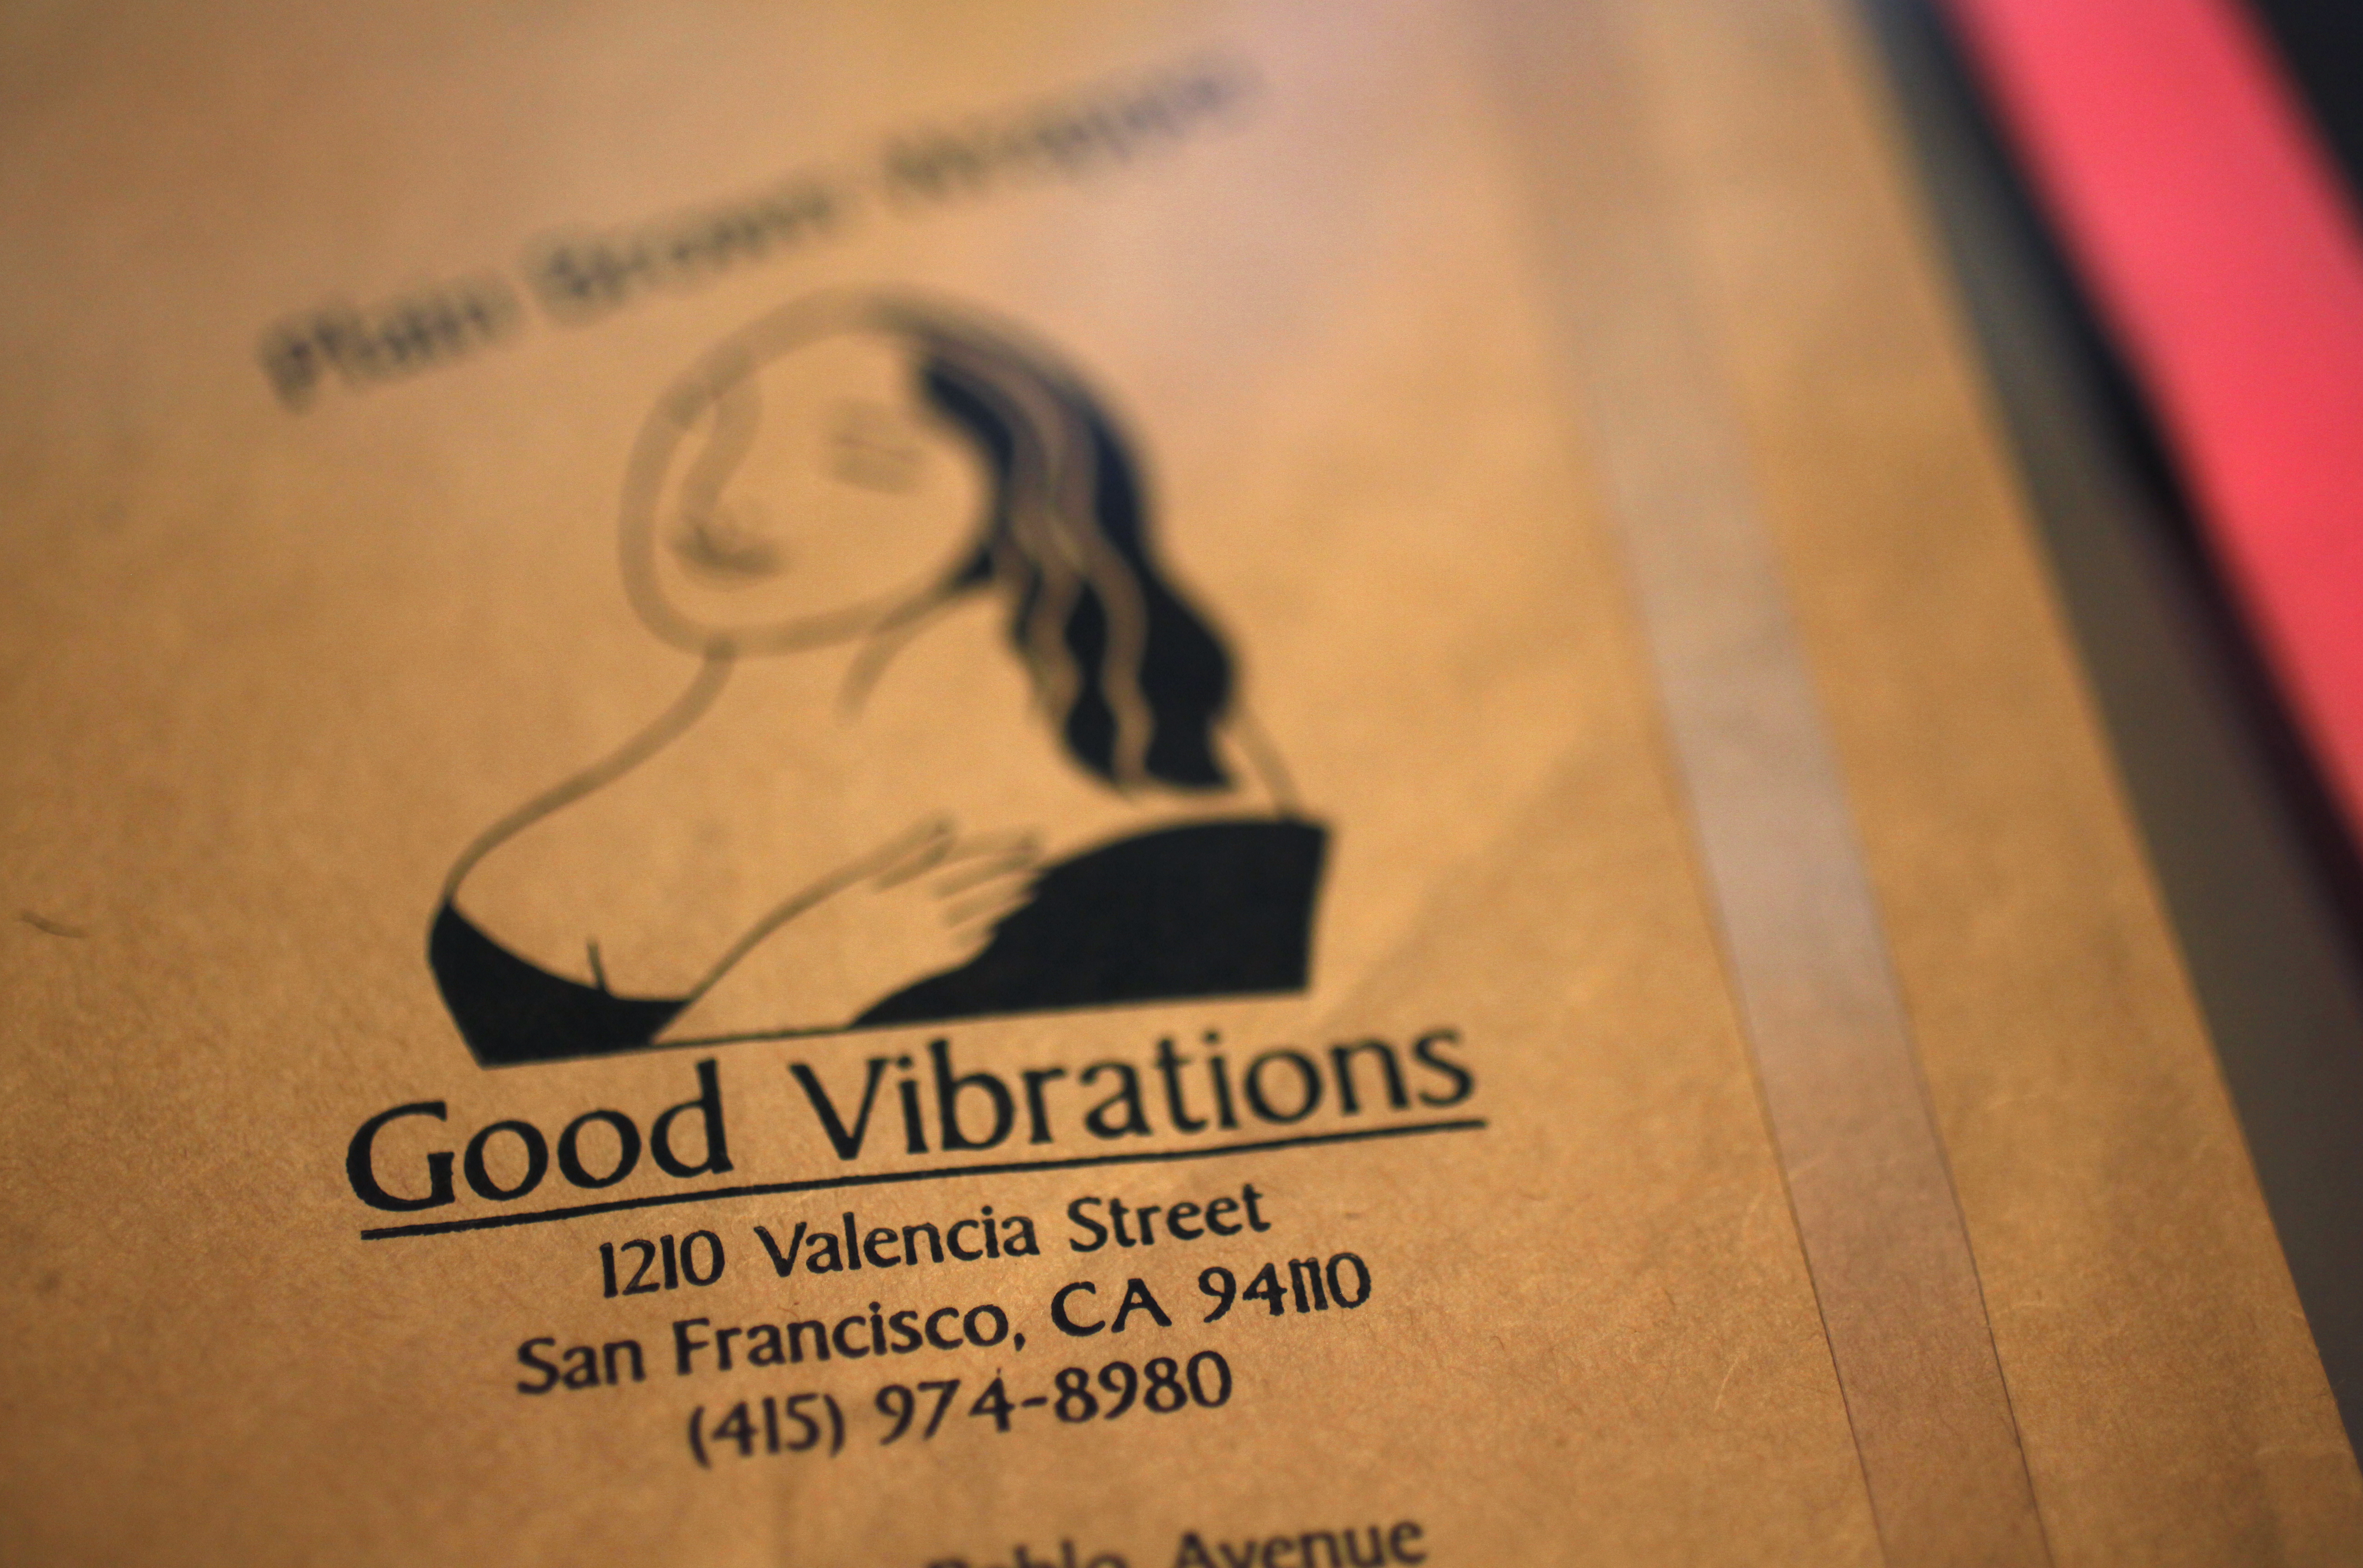 Good Vibrations workers file union bid at local adult retail stores - San  Francisco Business Times